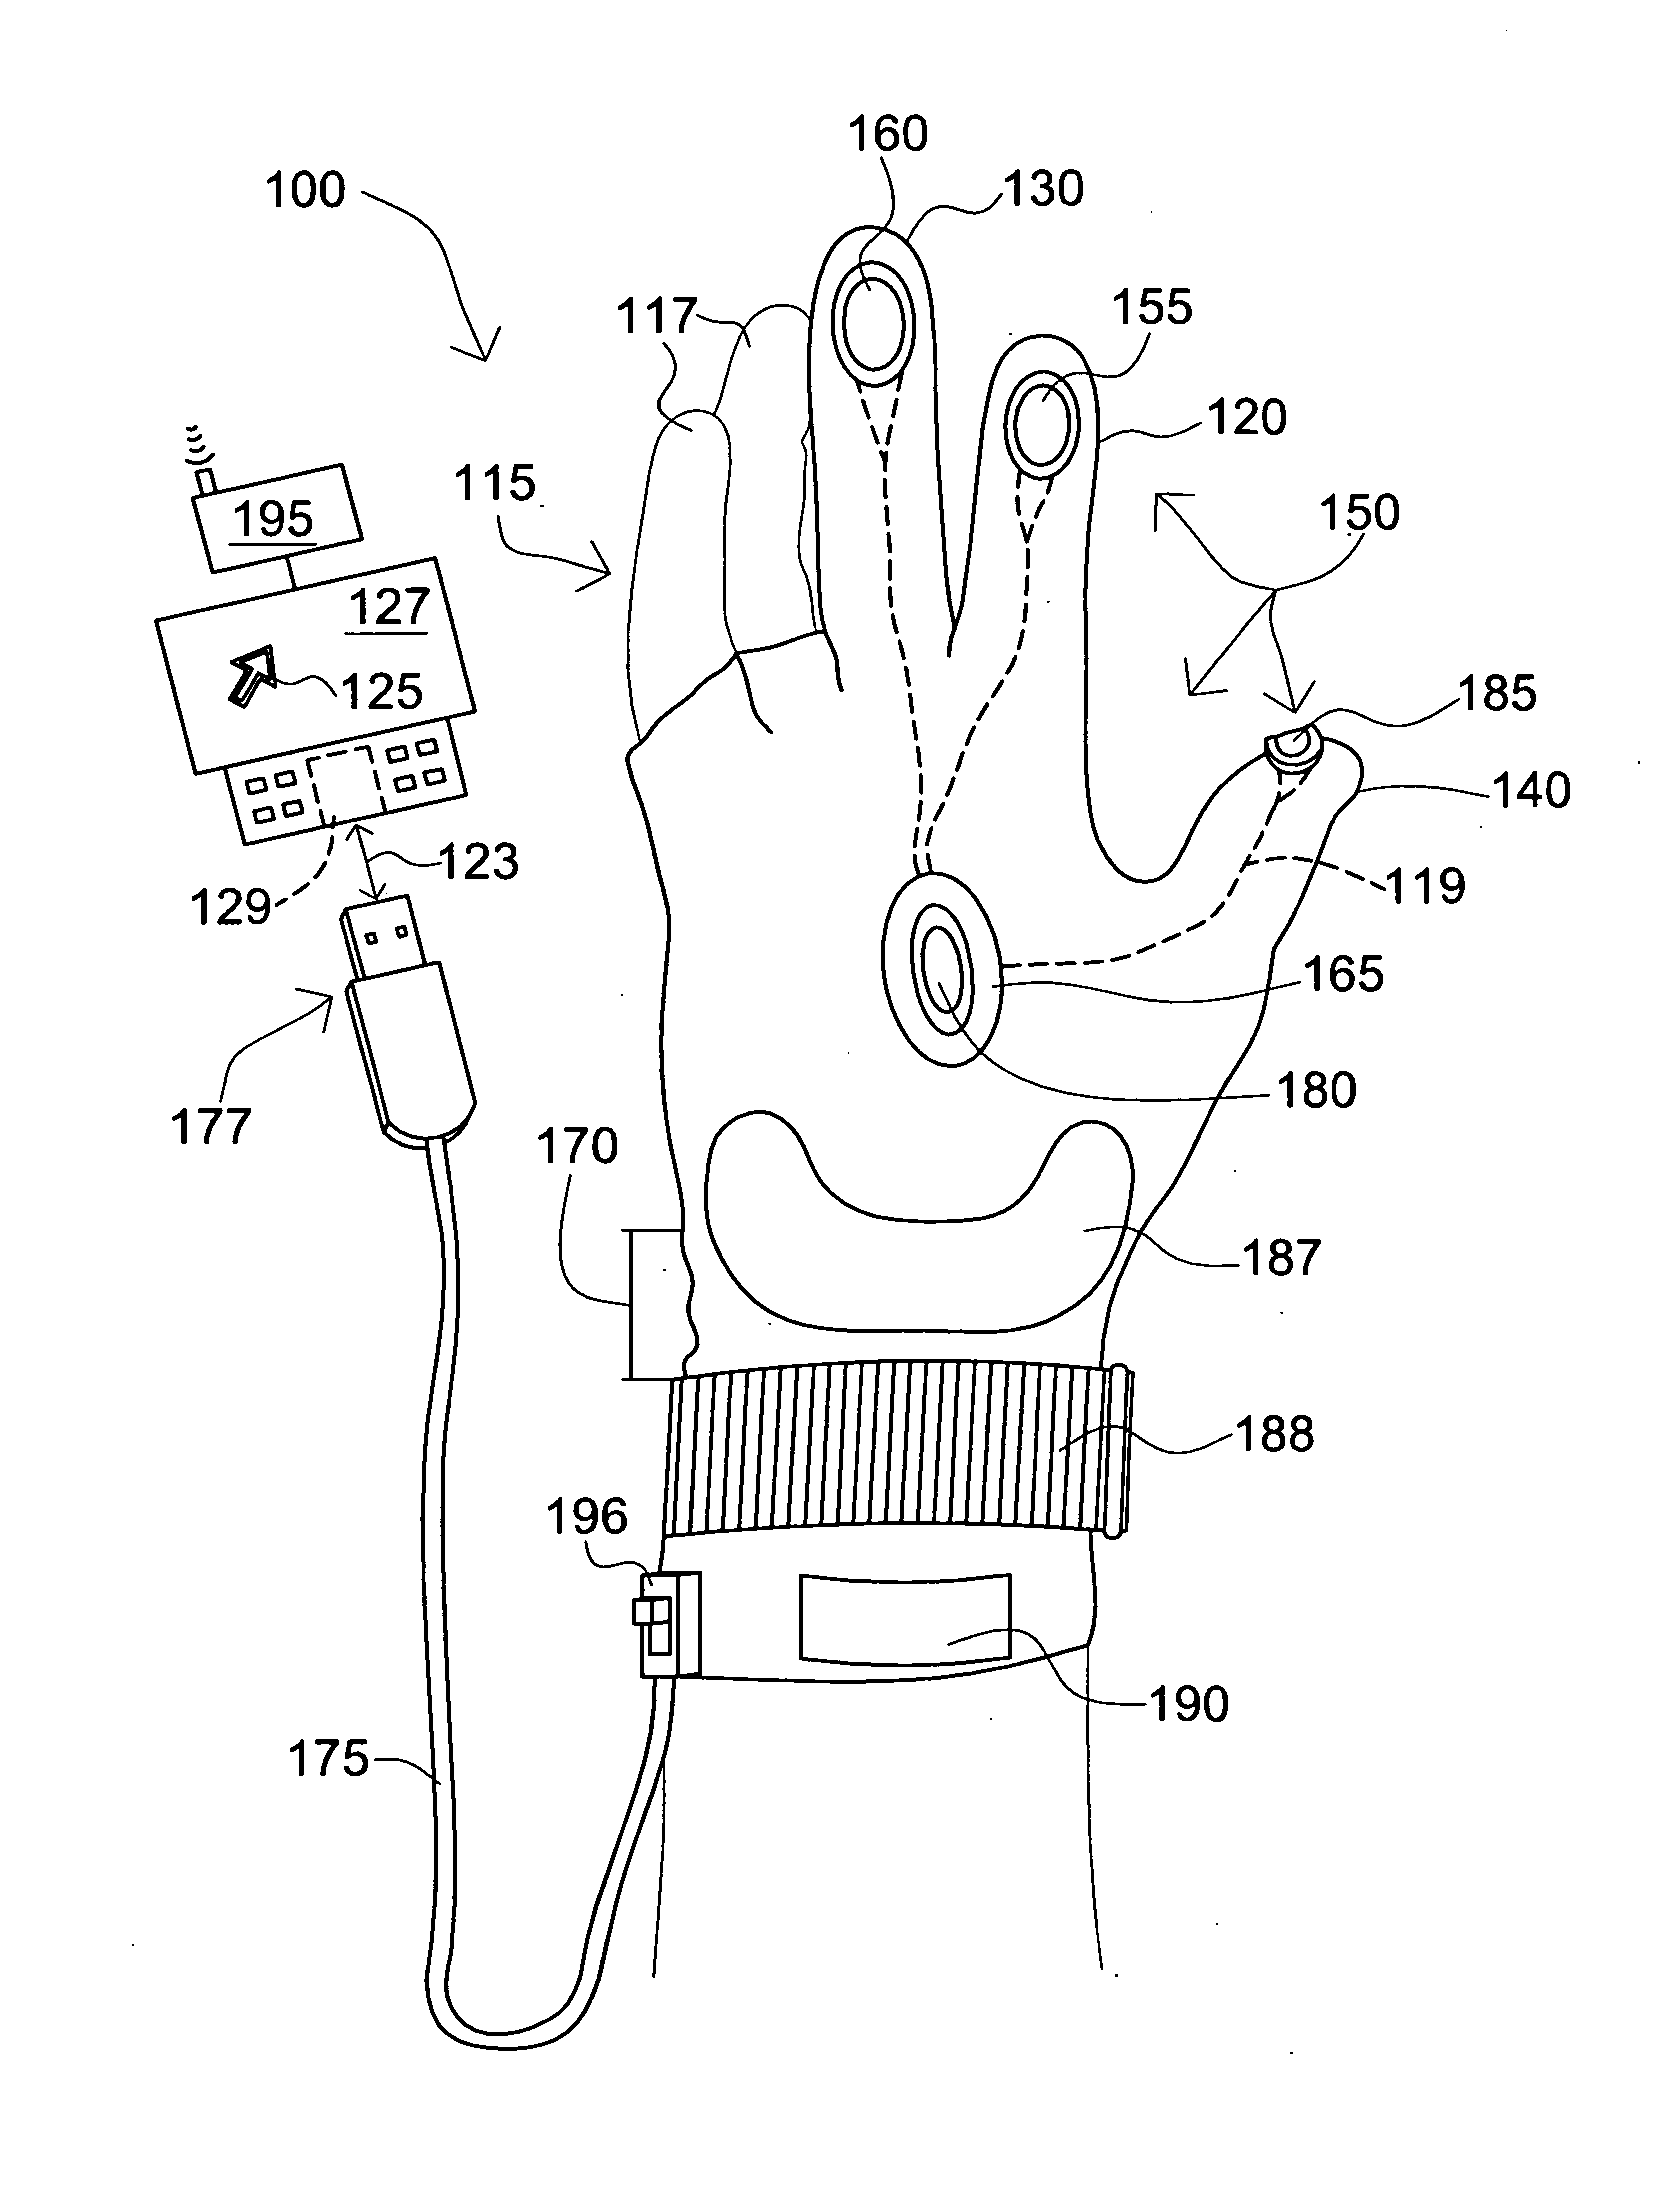 Computer mouse glove